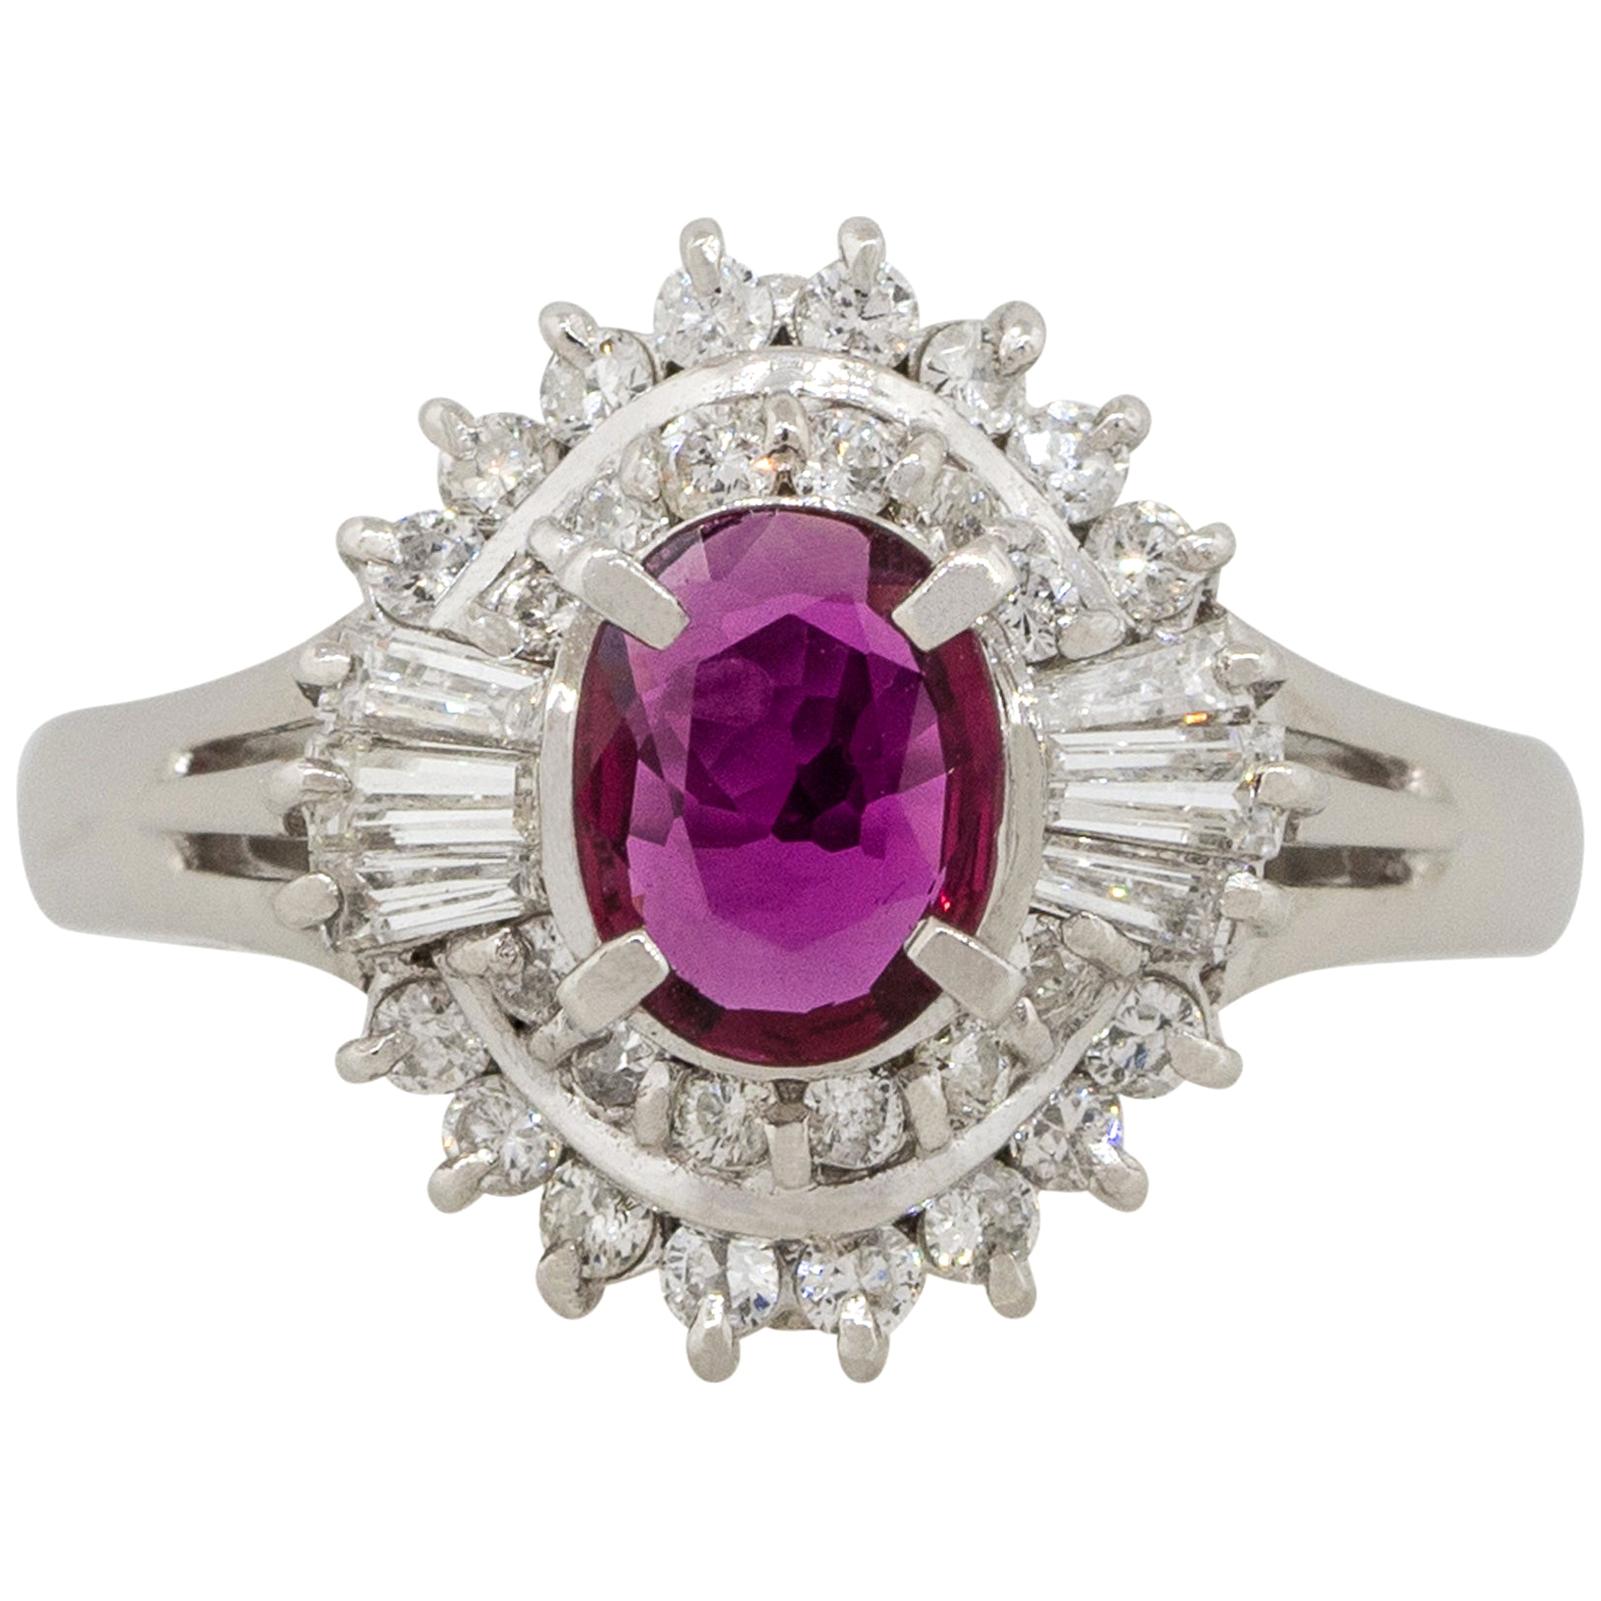 0.57 Carat Oval Ruby Center Diamond Cocktail Ring Platinum in Stock